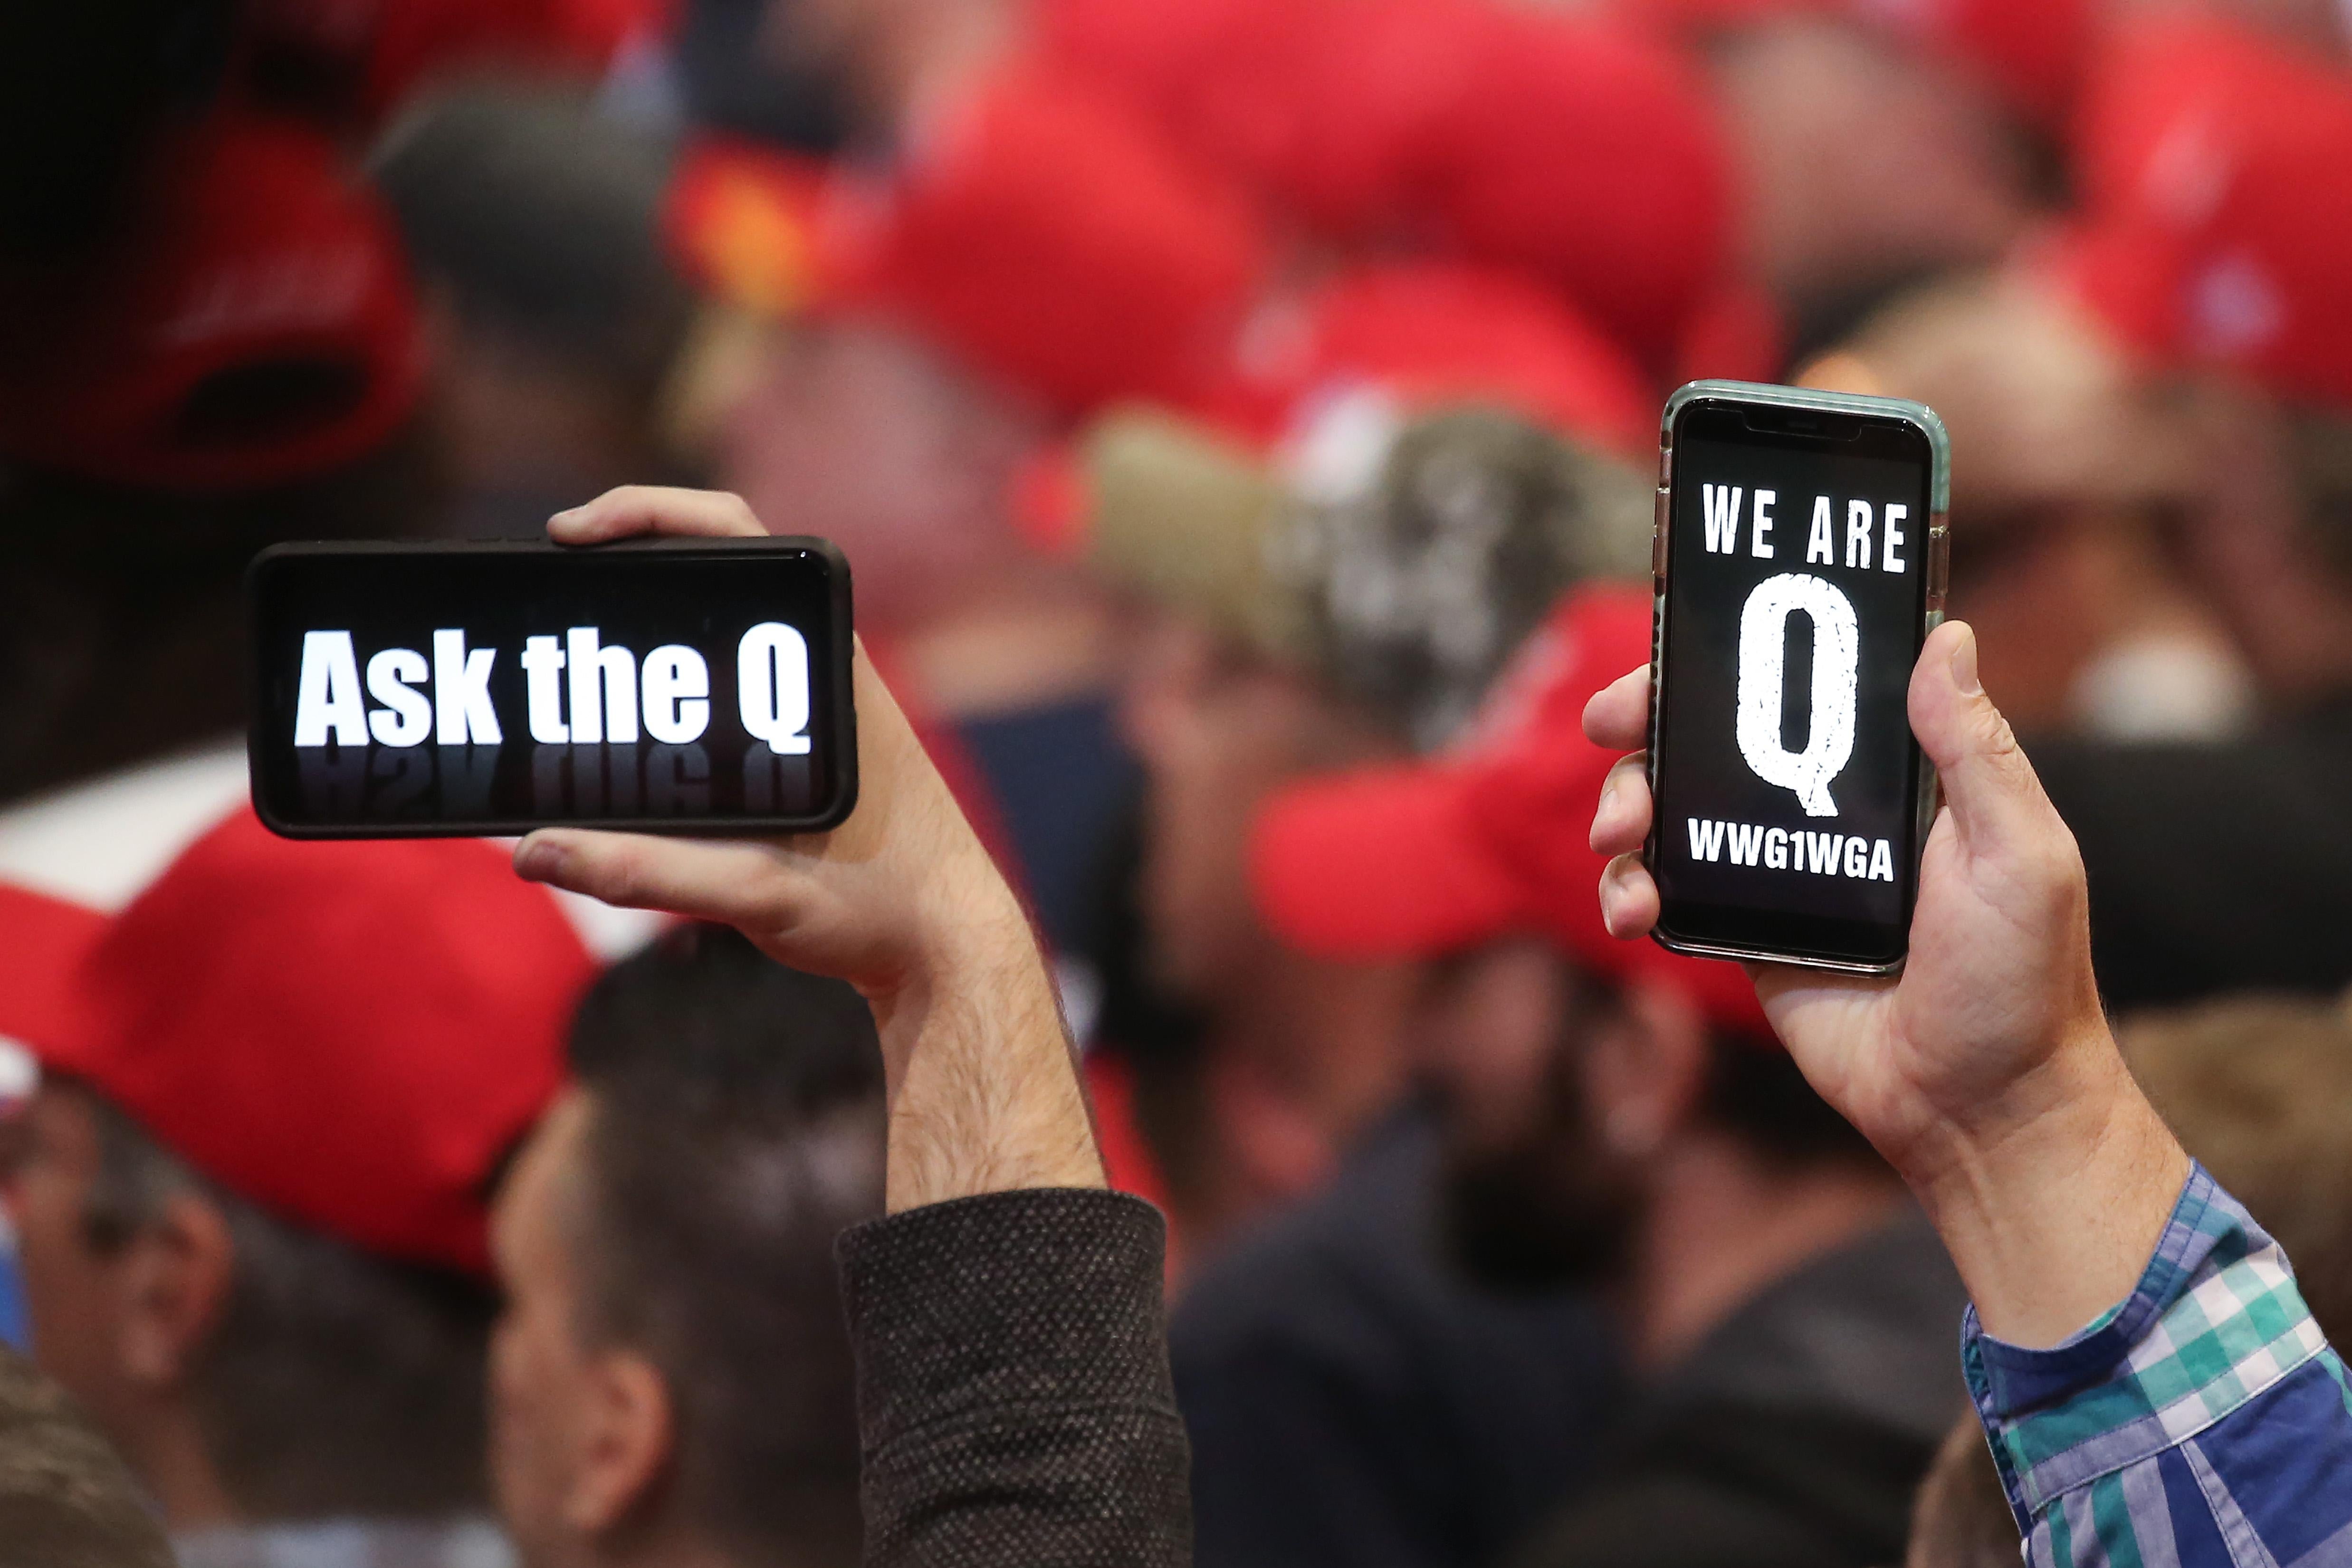 Trump supporters hold up their phones with messages referring to the QAnon conspiracy theory at a Las Vegas campaign rally.